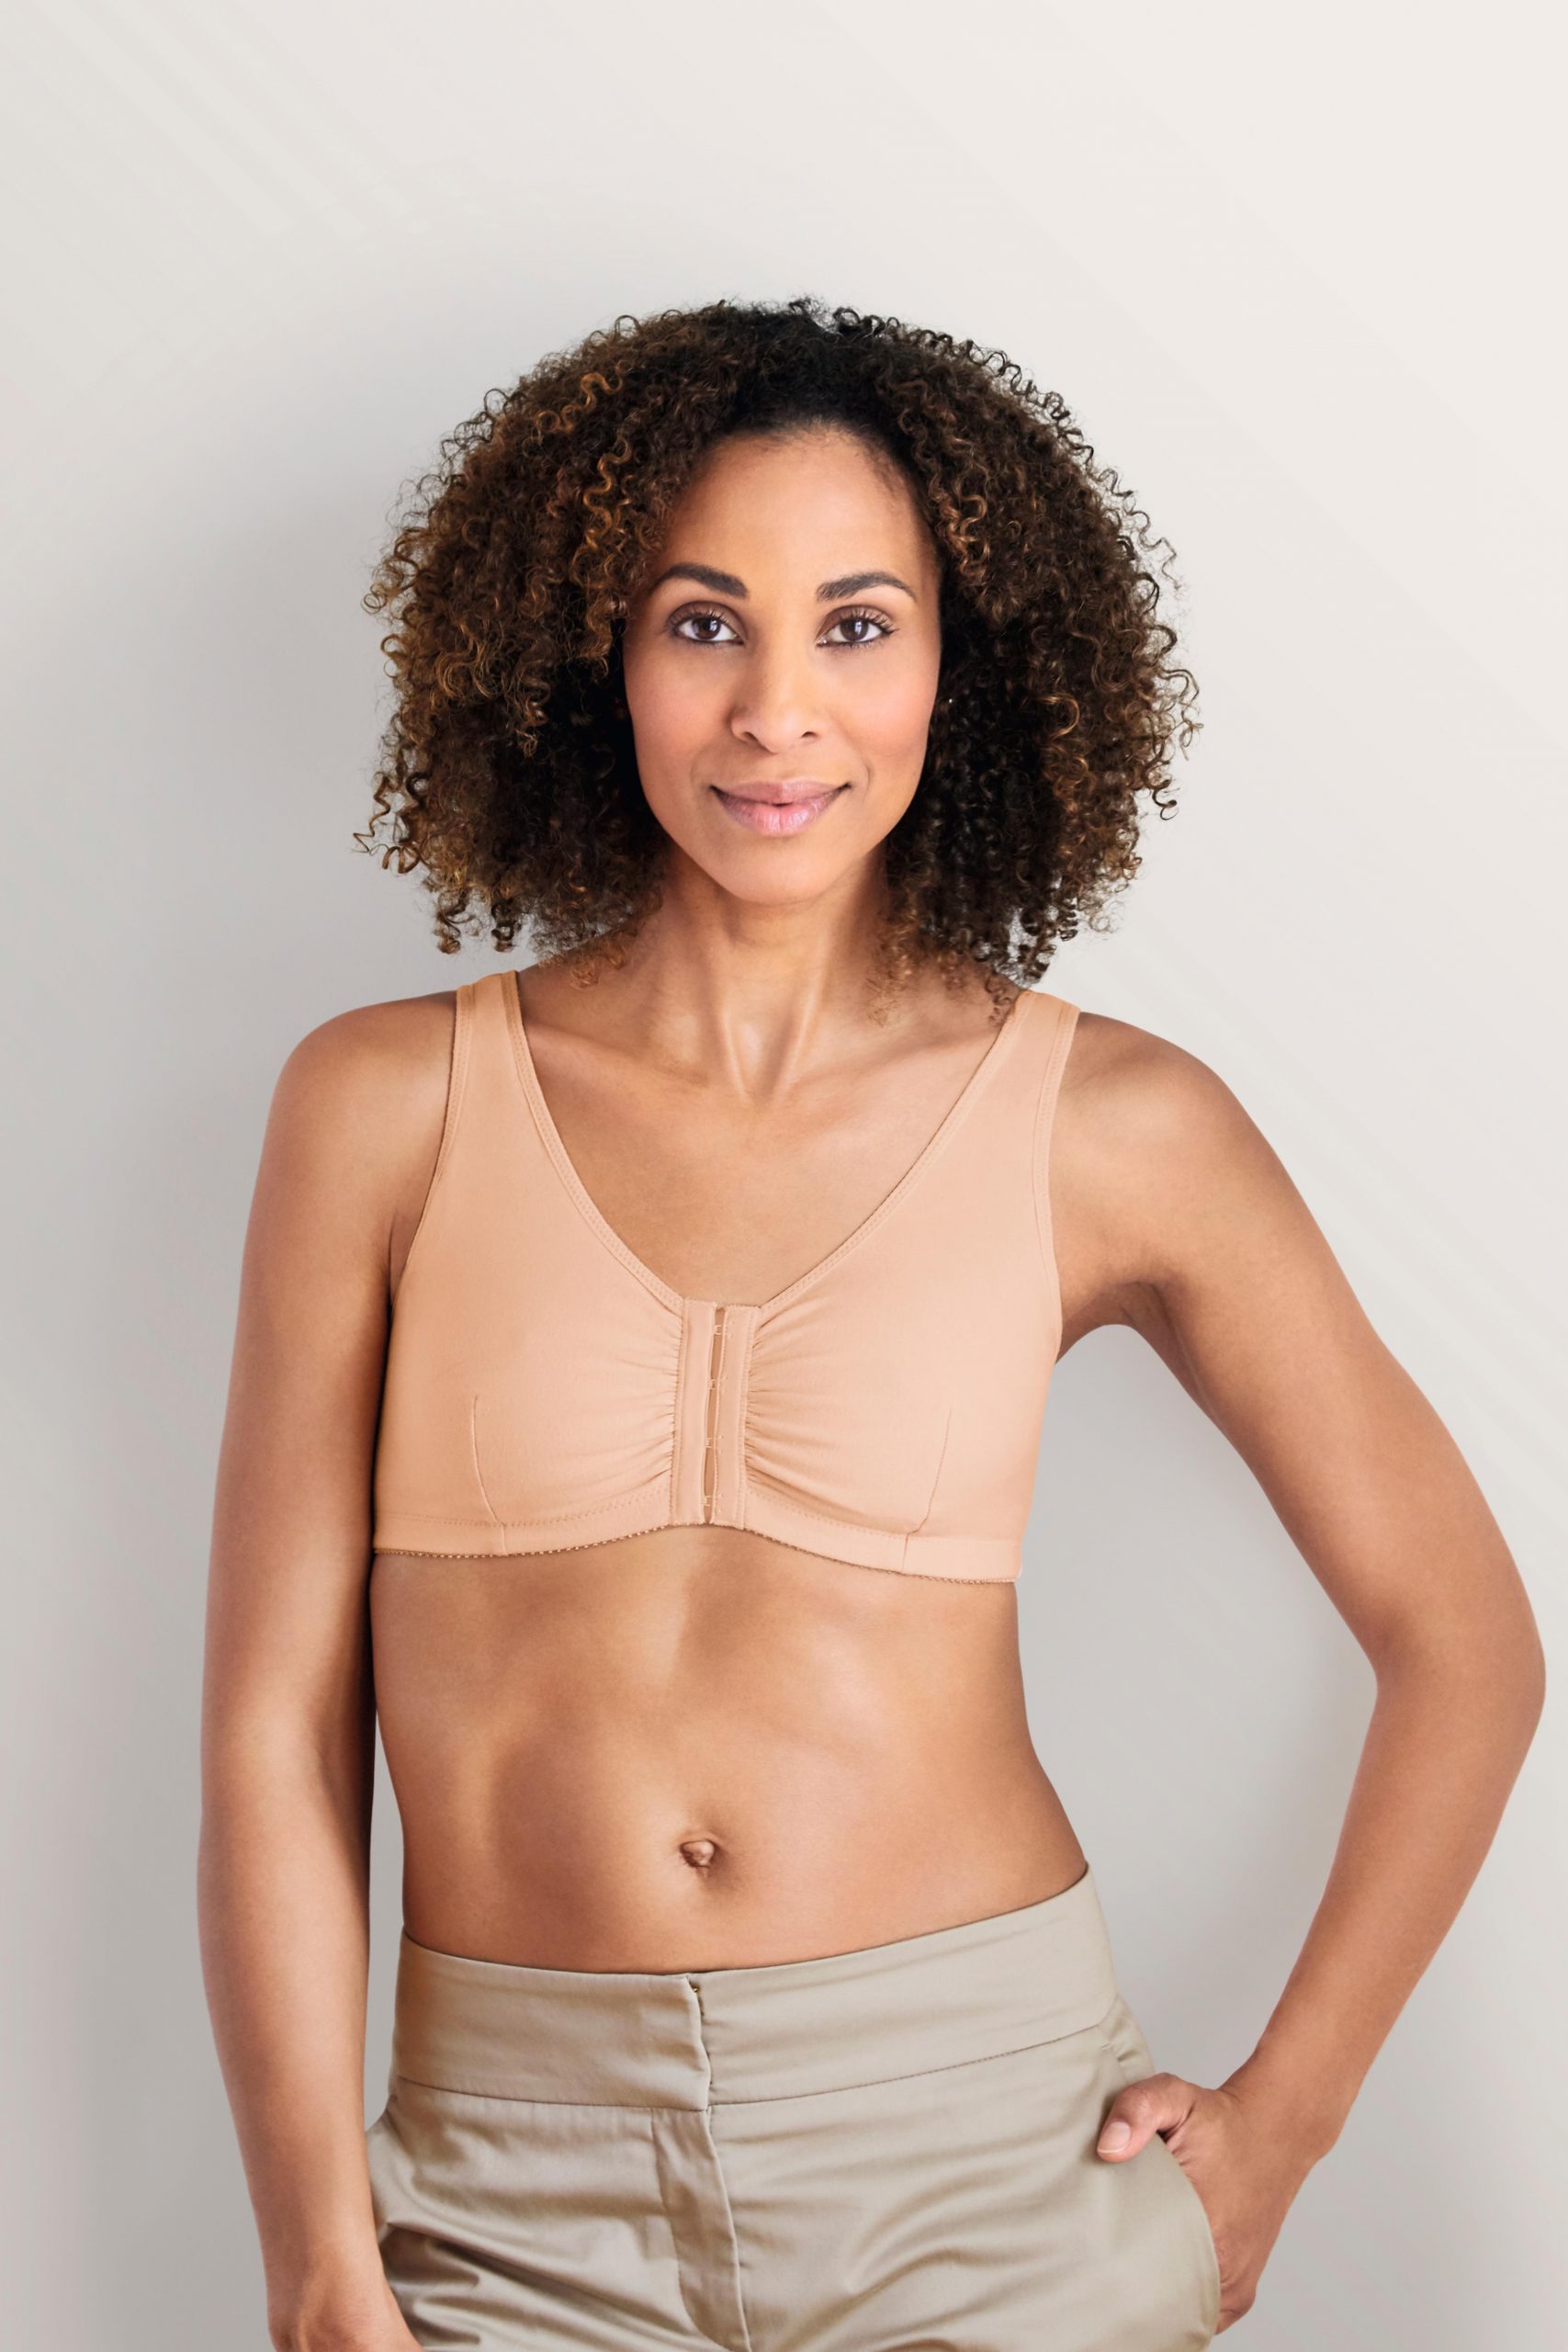 Front Closure Mastectomy Bras, Breast Cancer Bras, Bras For